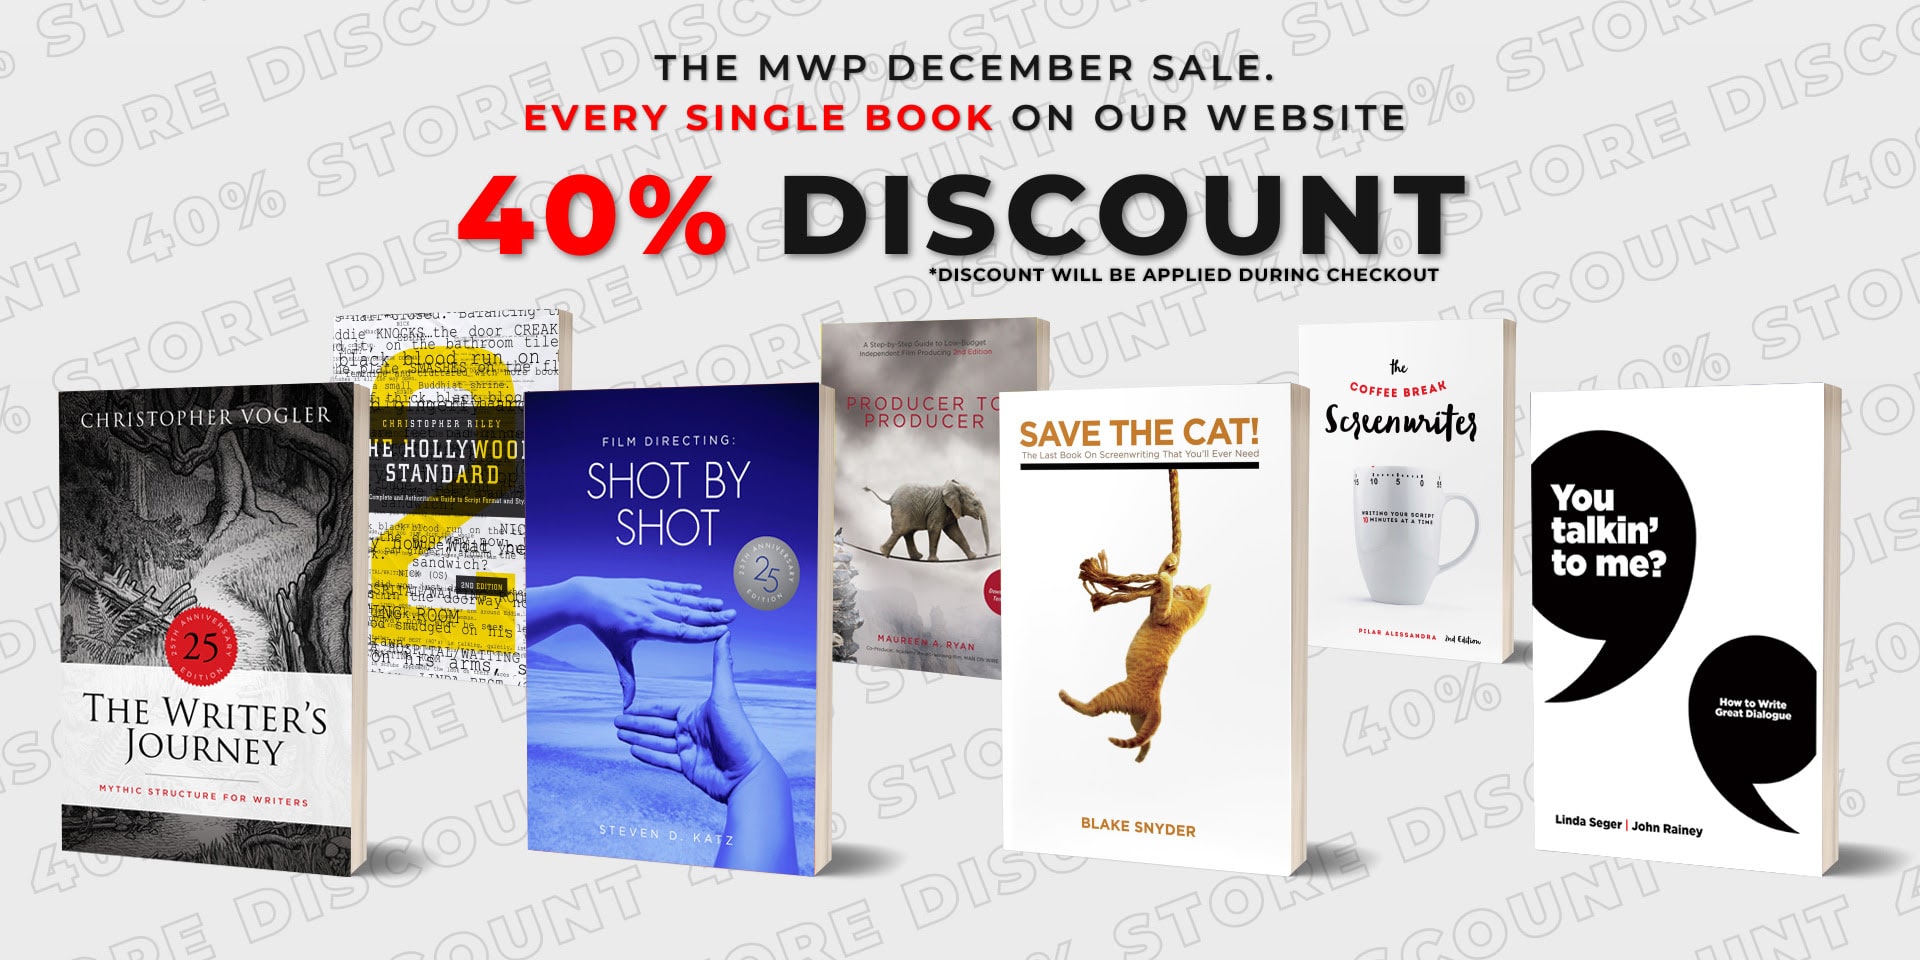 Every single book on MWP.com is on sale for 40% off for a limited time!